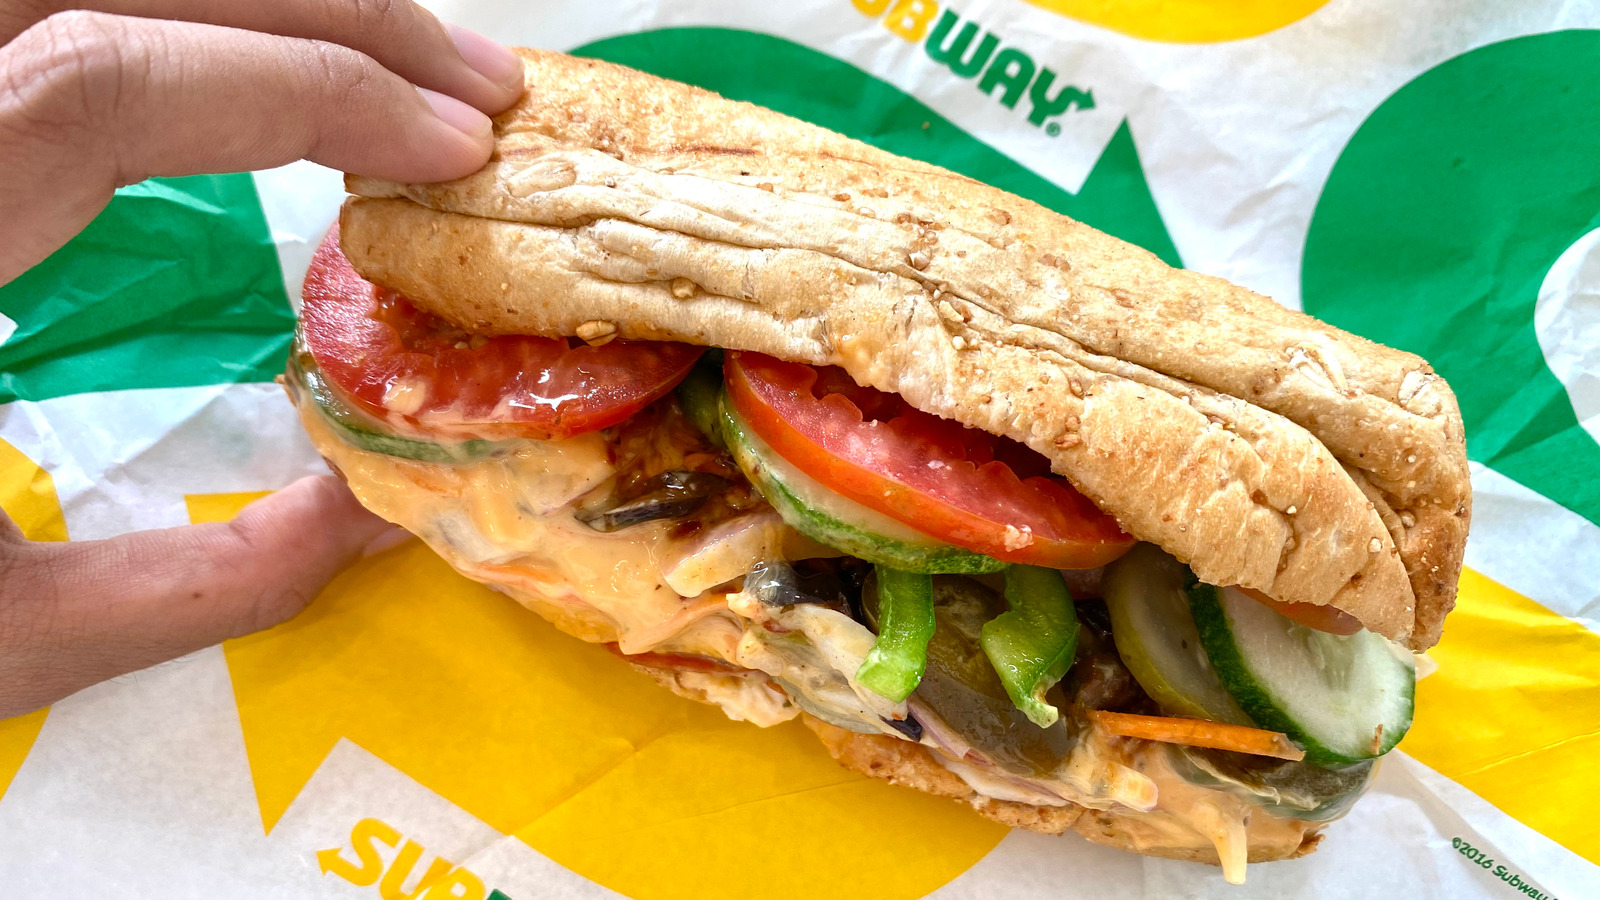 Subway Nutrition Facts: What to Order & Avoid